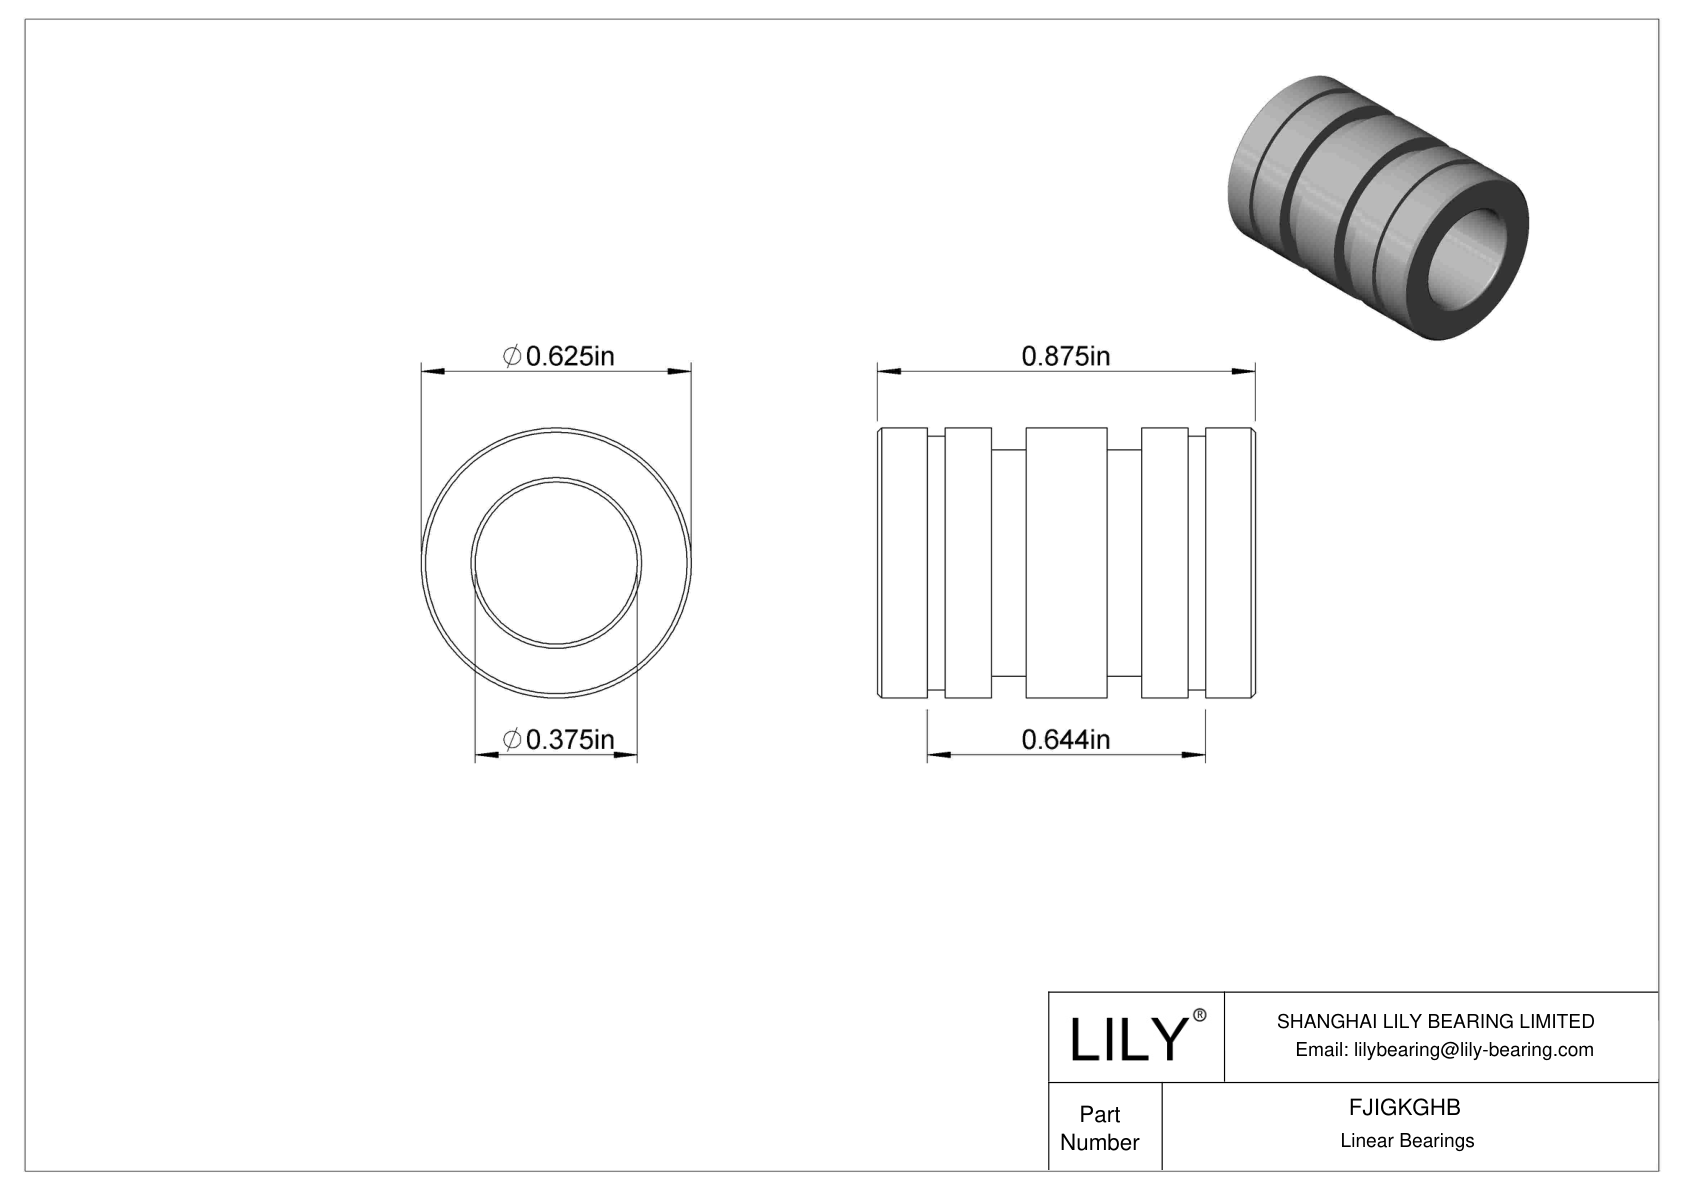 FJIGKGHB Common Linear Sleeve Bearings cad drawing